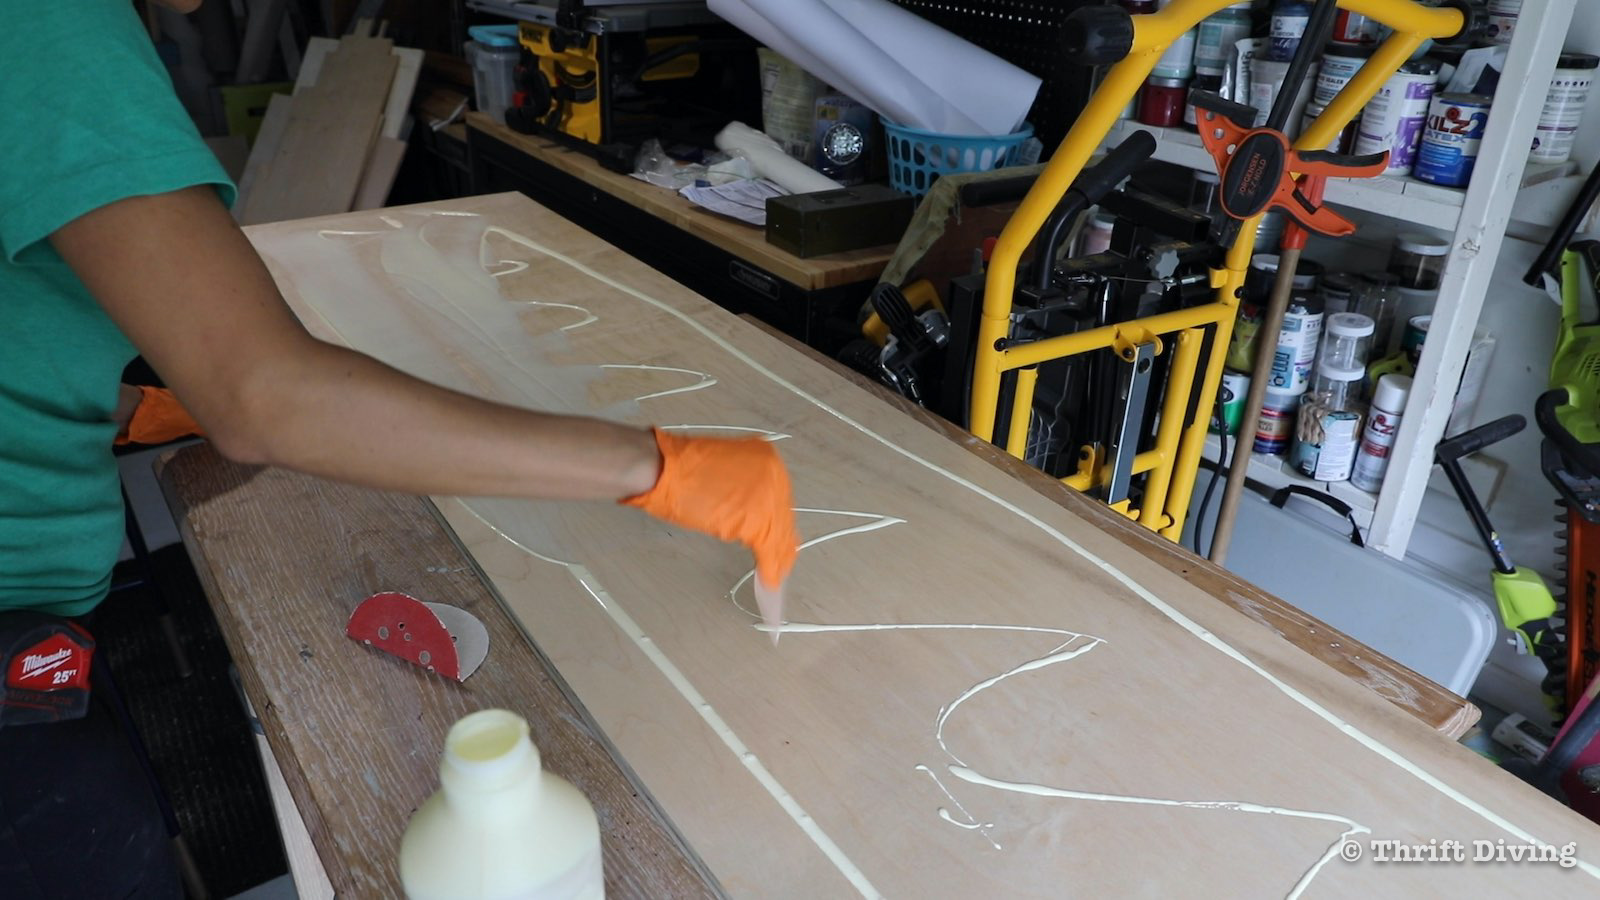 How to Build a Walk-in Closet Organizer From Scratch - Glue panels of plywood together to make thicker panels. - Thrift Diving